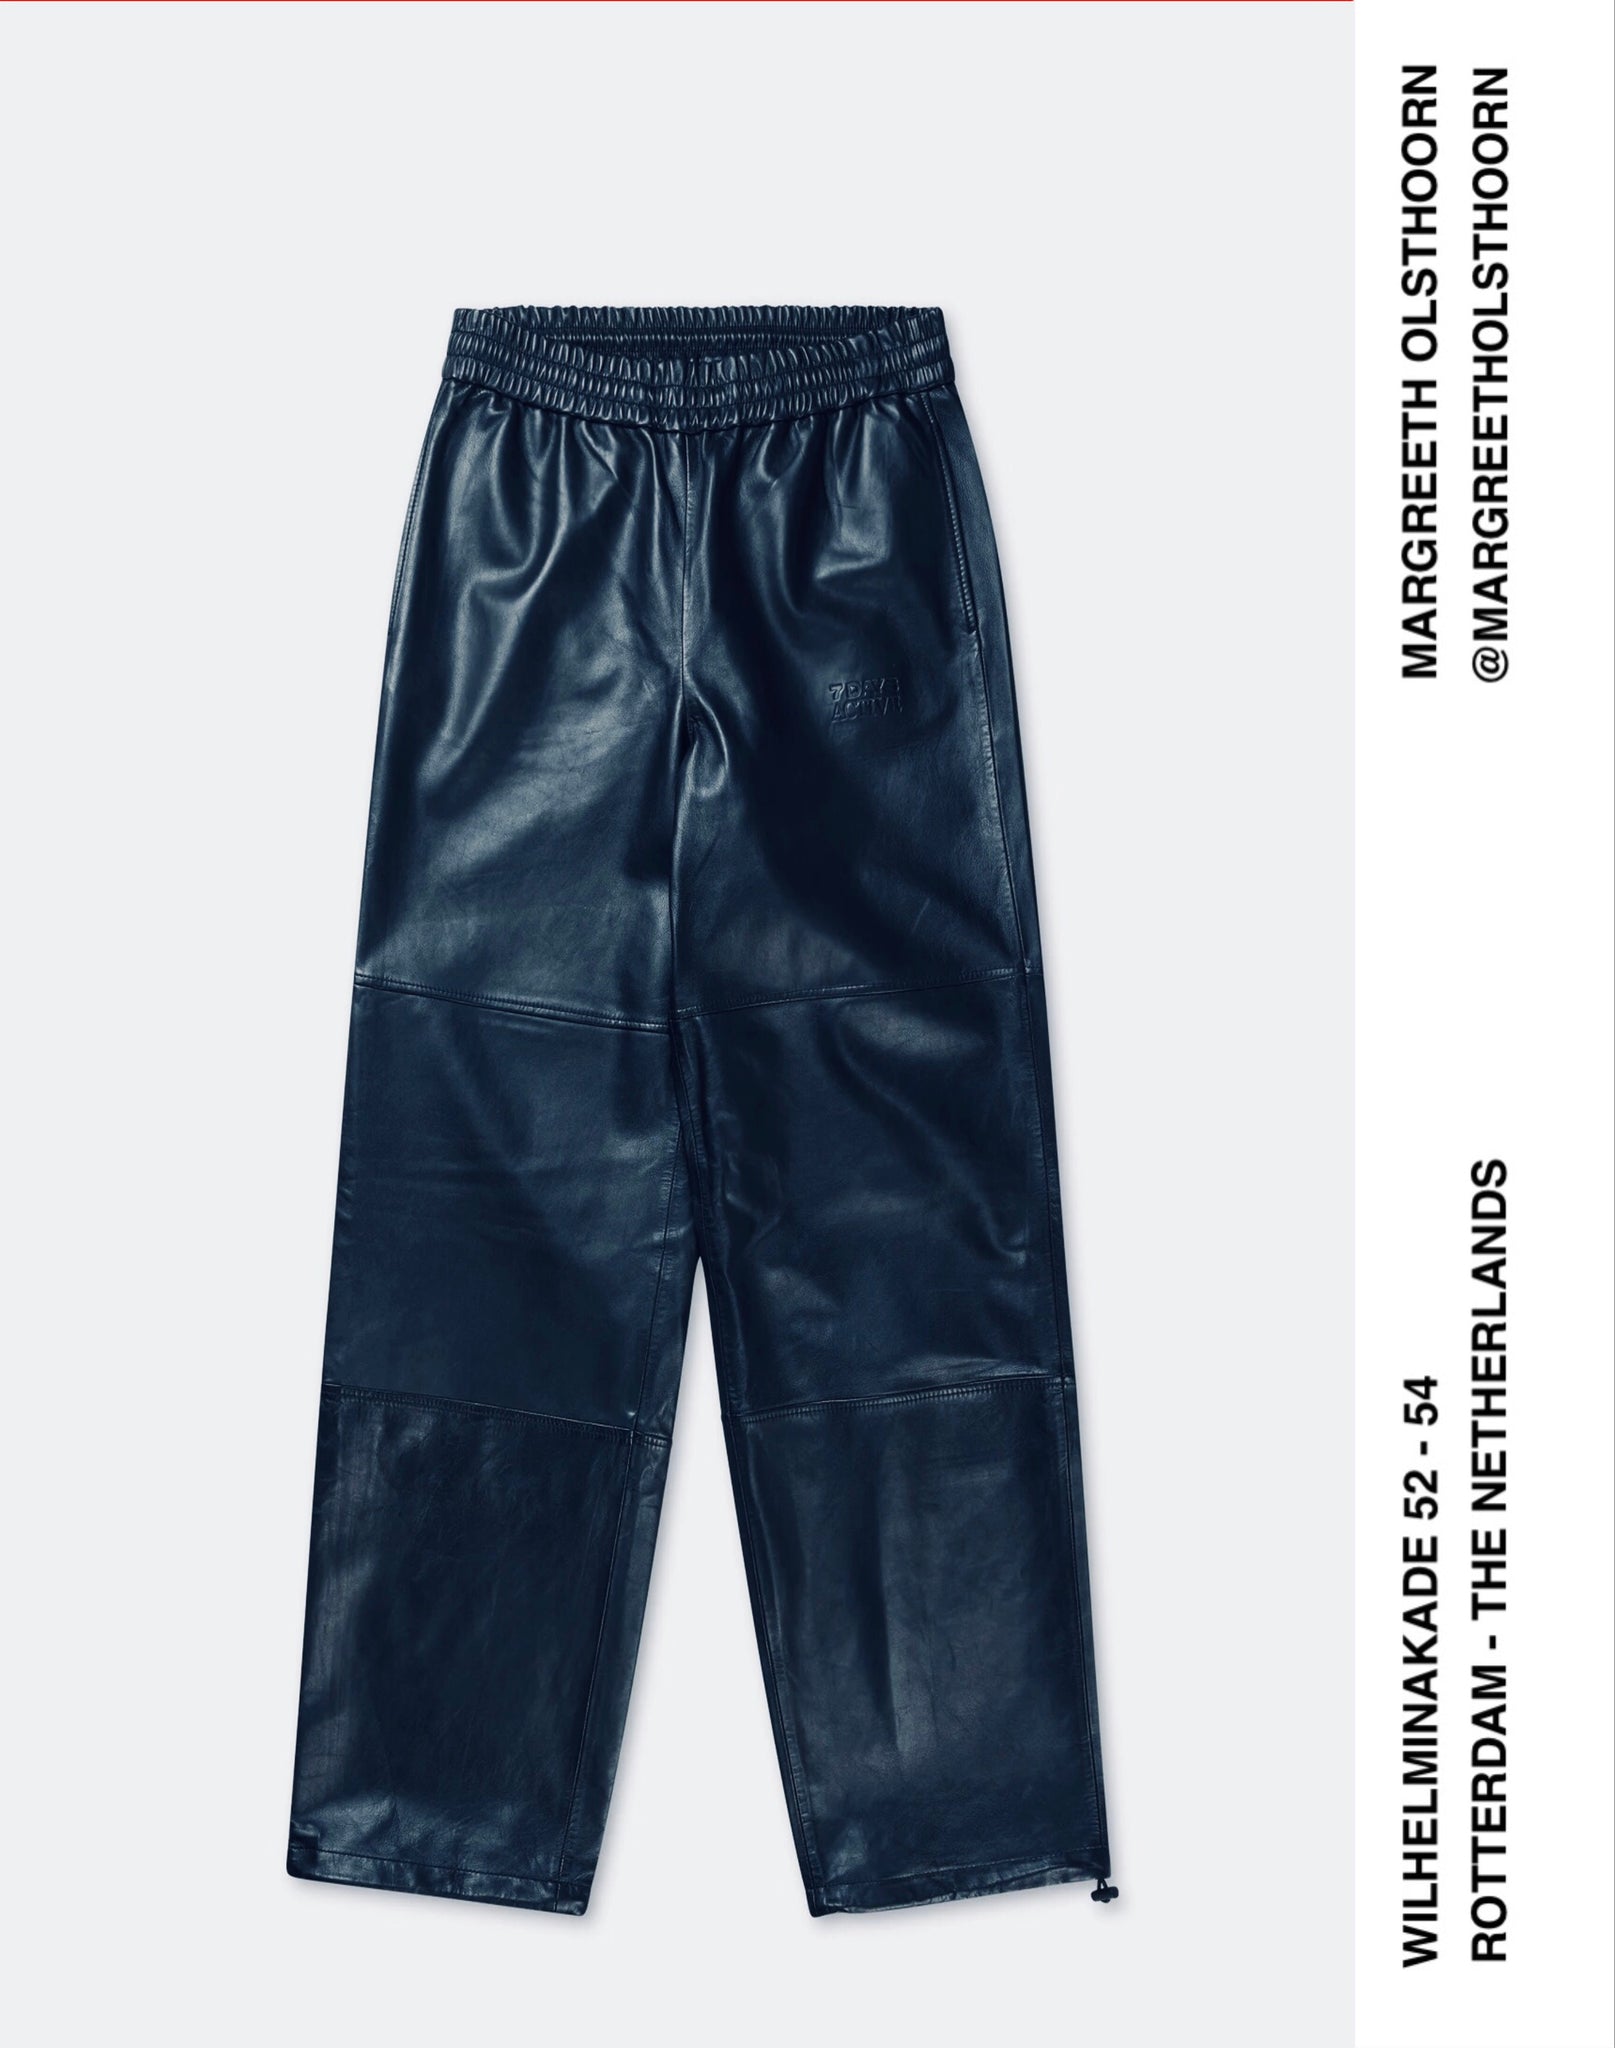 LEATHER TRACK PANTS